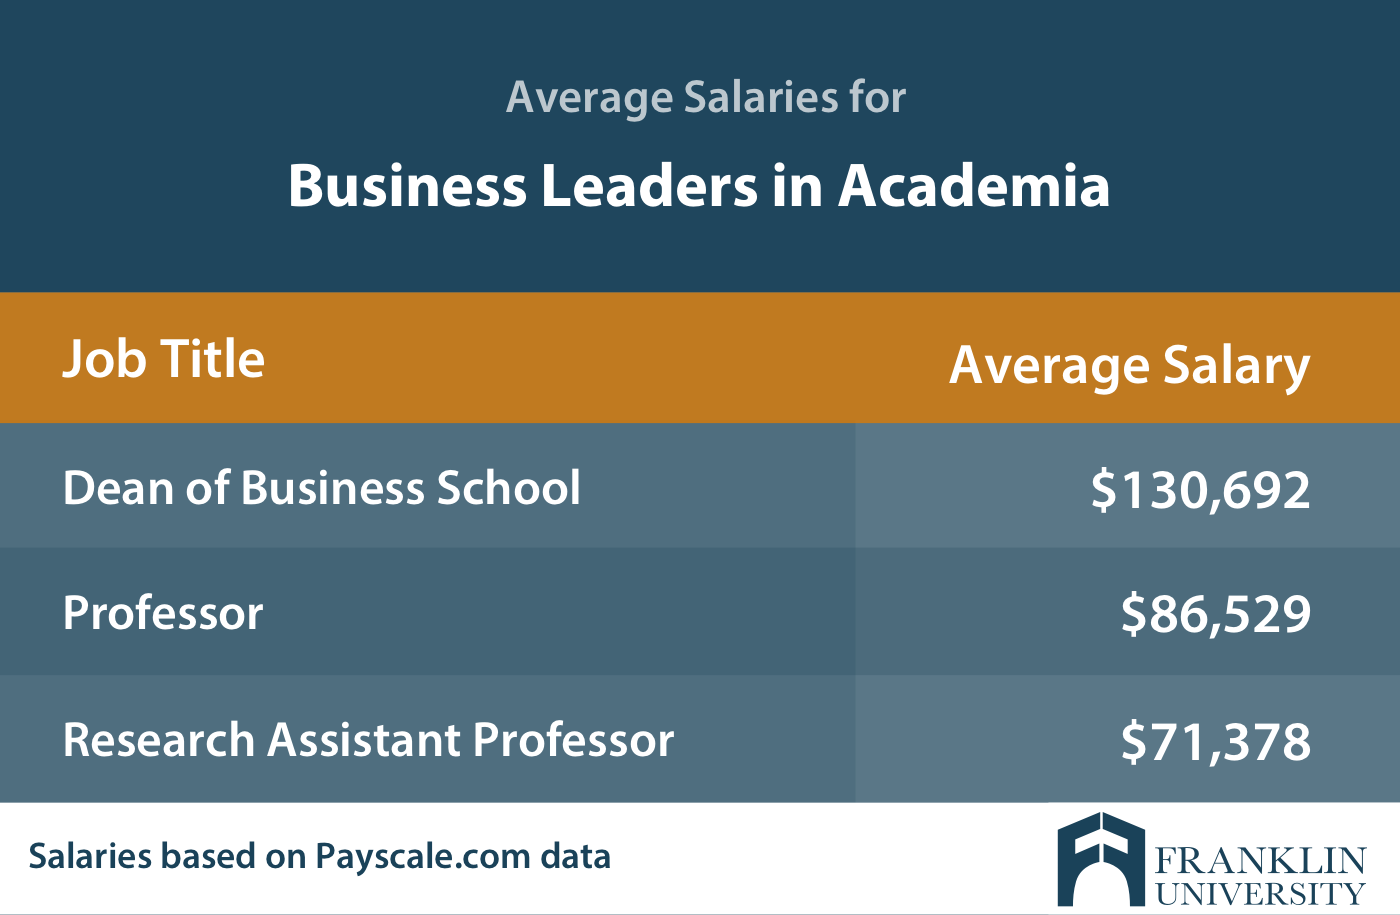 graphic describing the average salaries for business leaders in academia